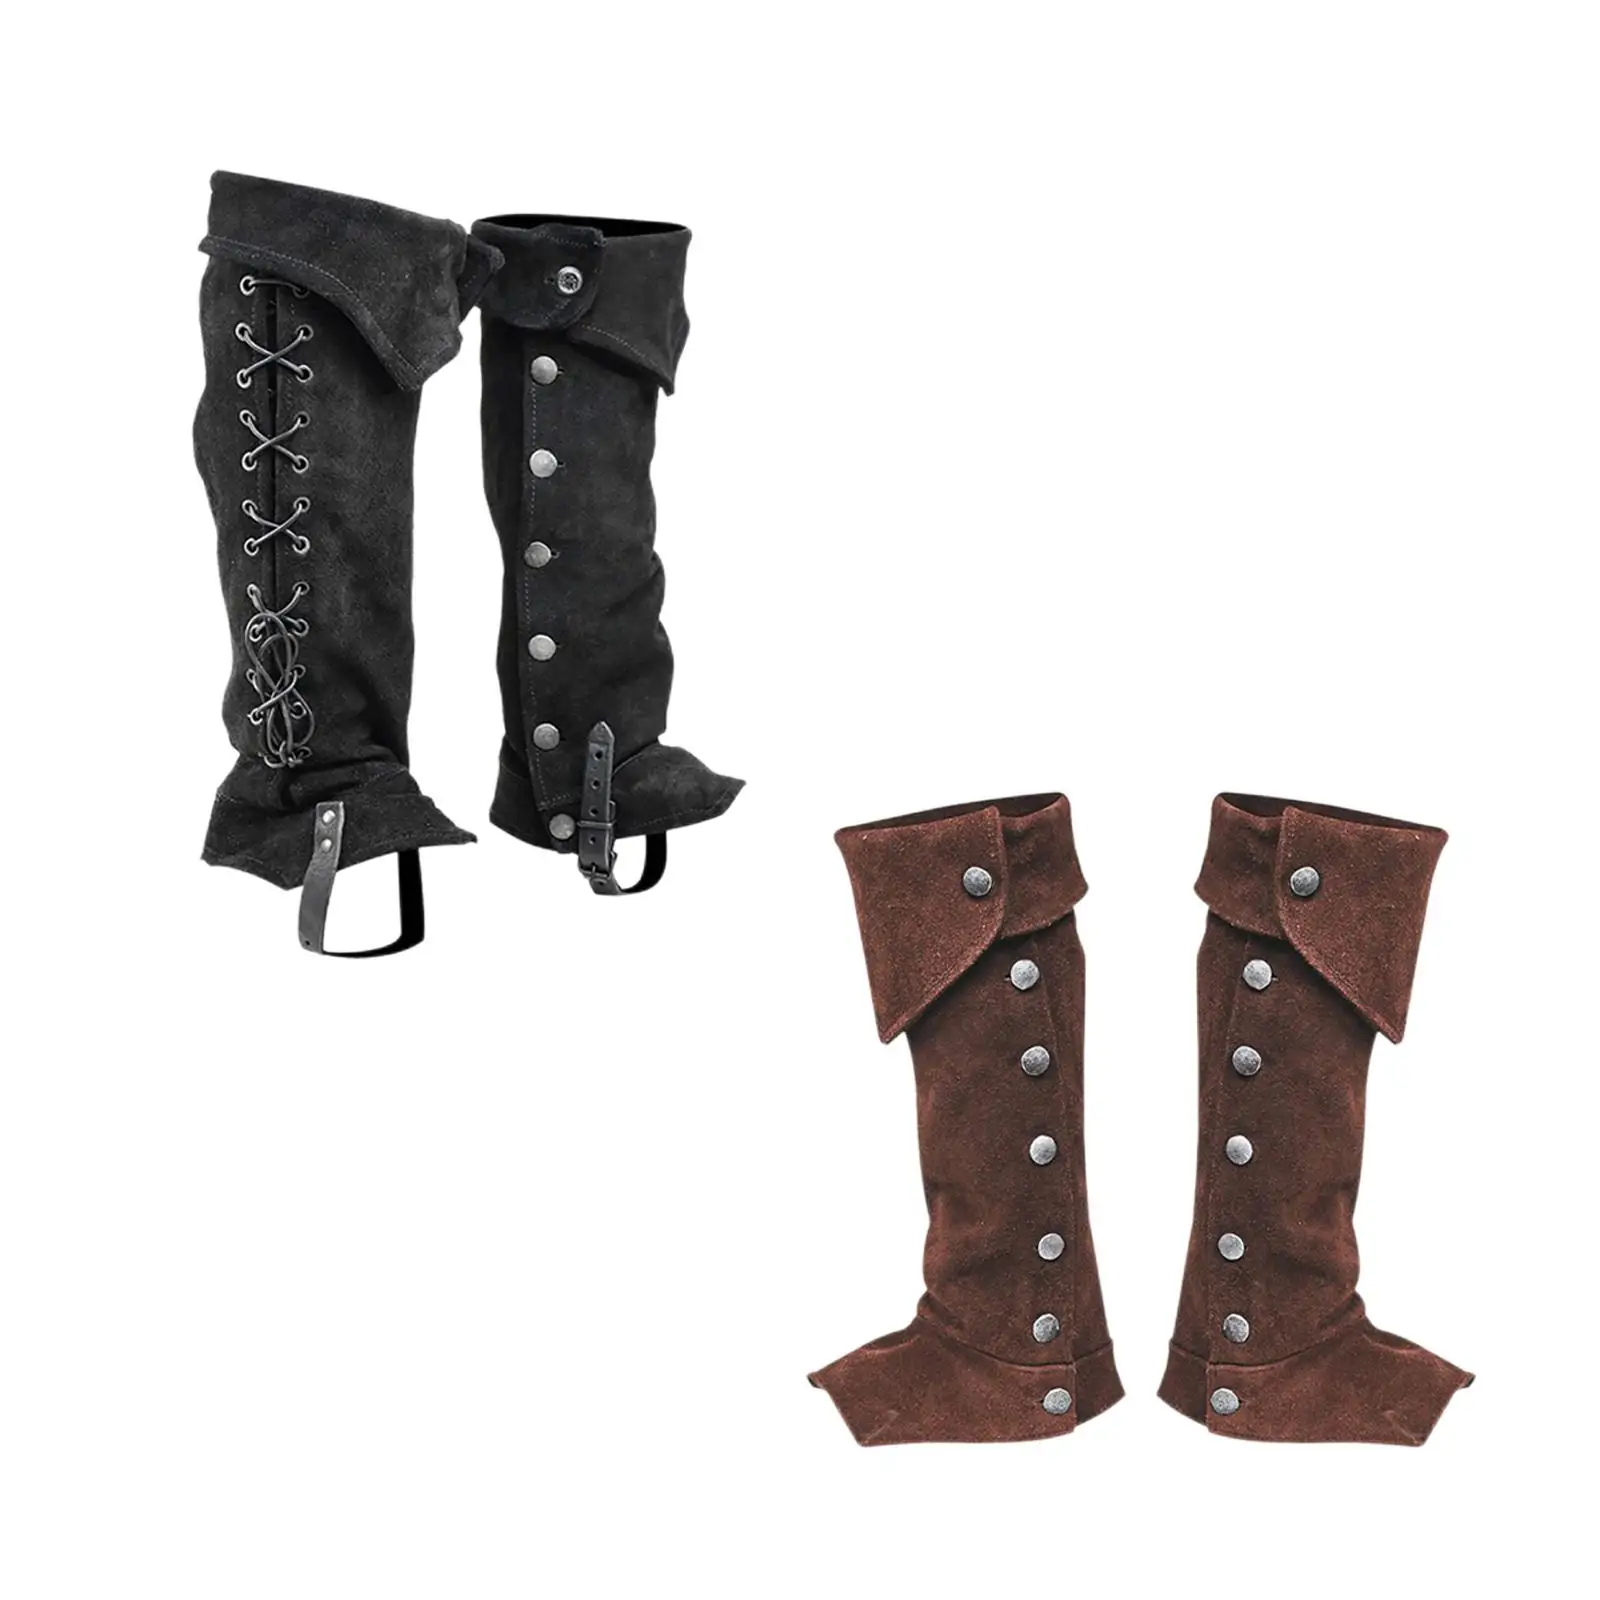 Pirate Boot Cover Knight Warrior Renaissance Bandage Boots Case Boot Covers